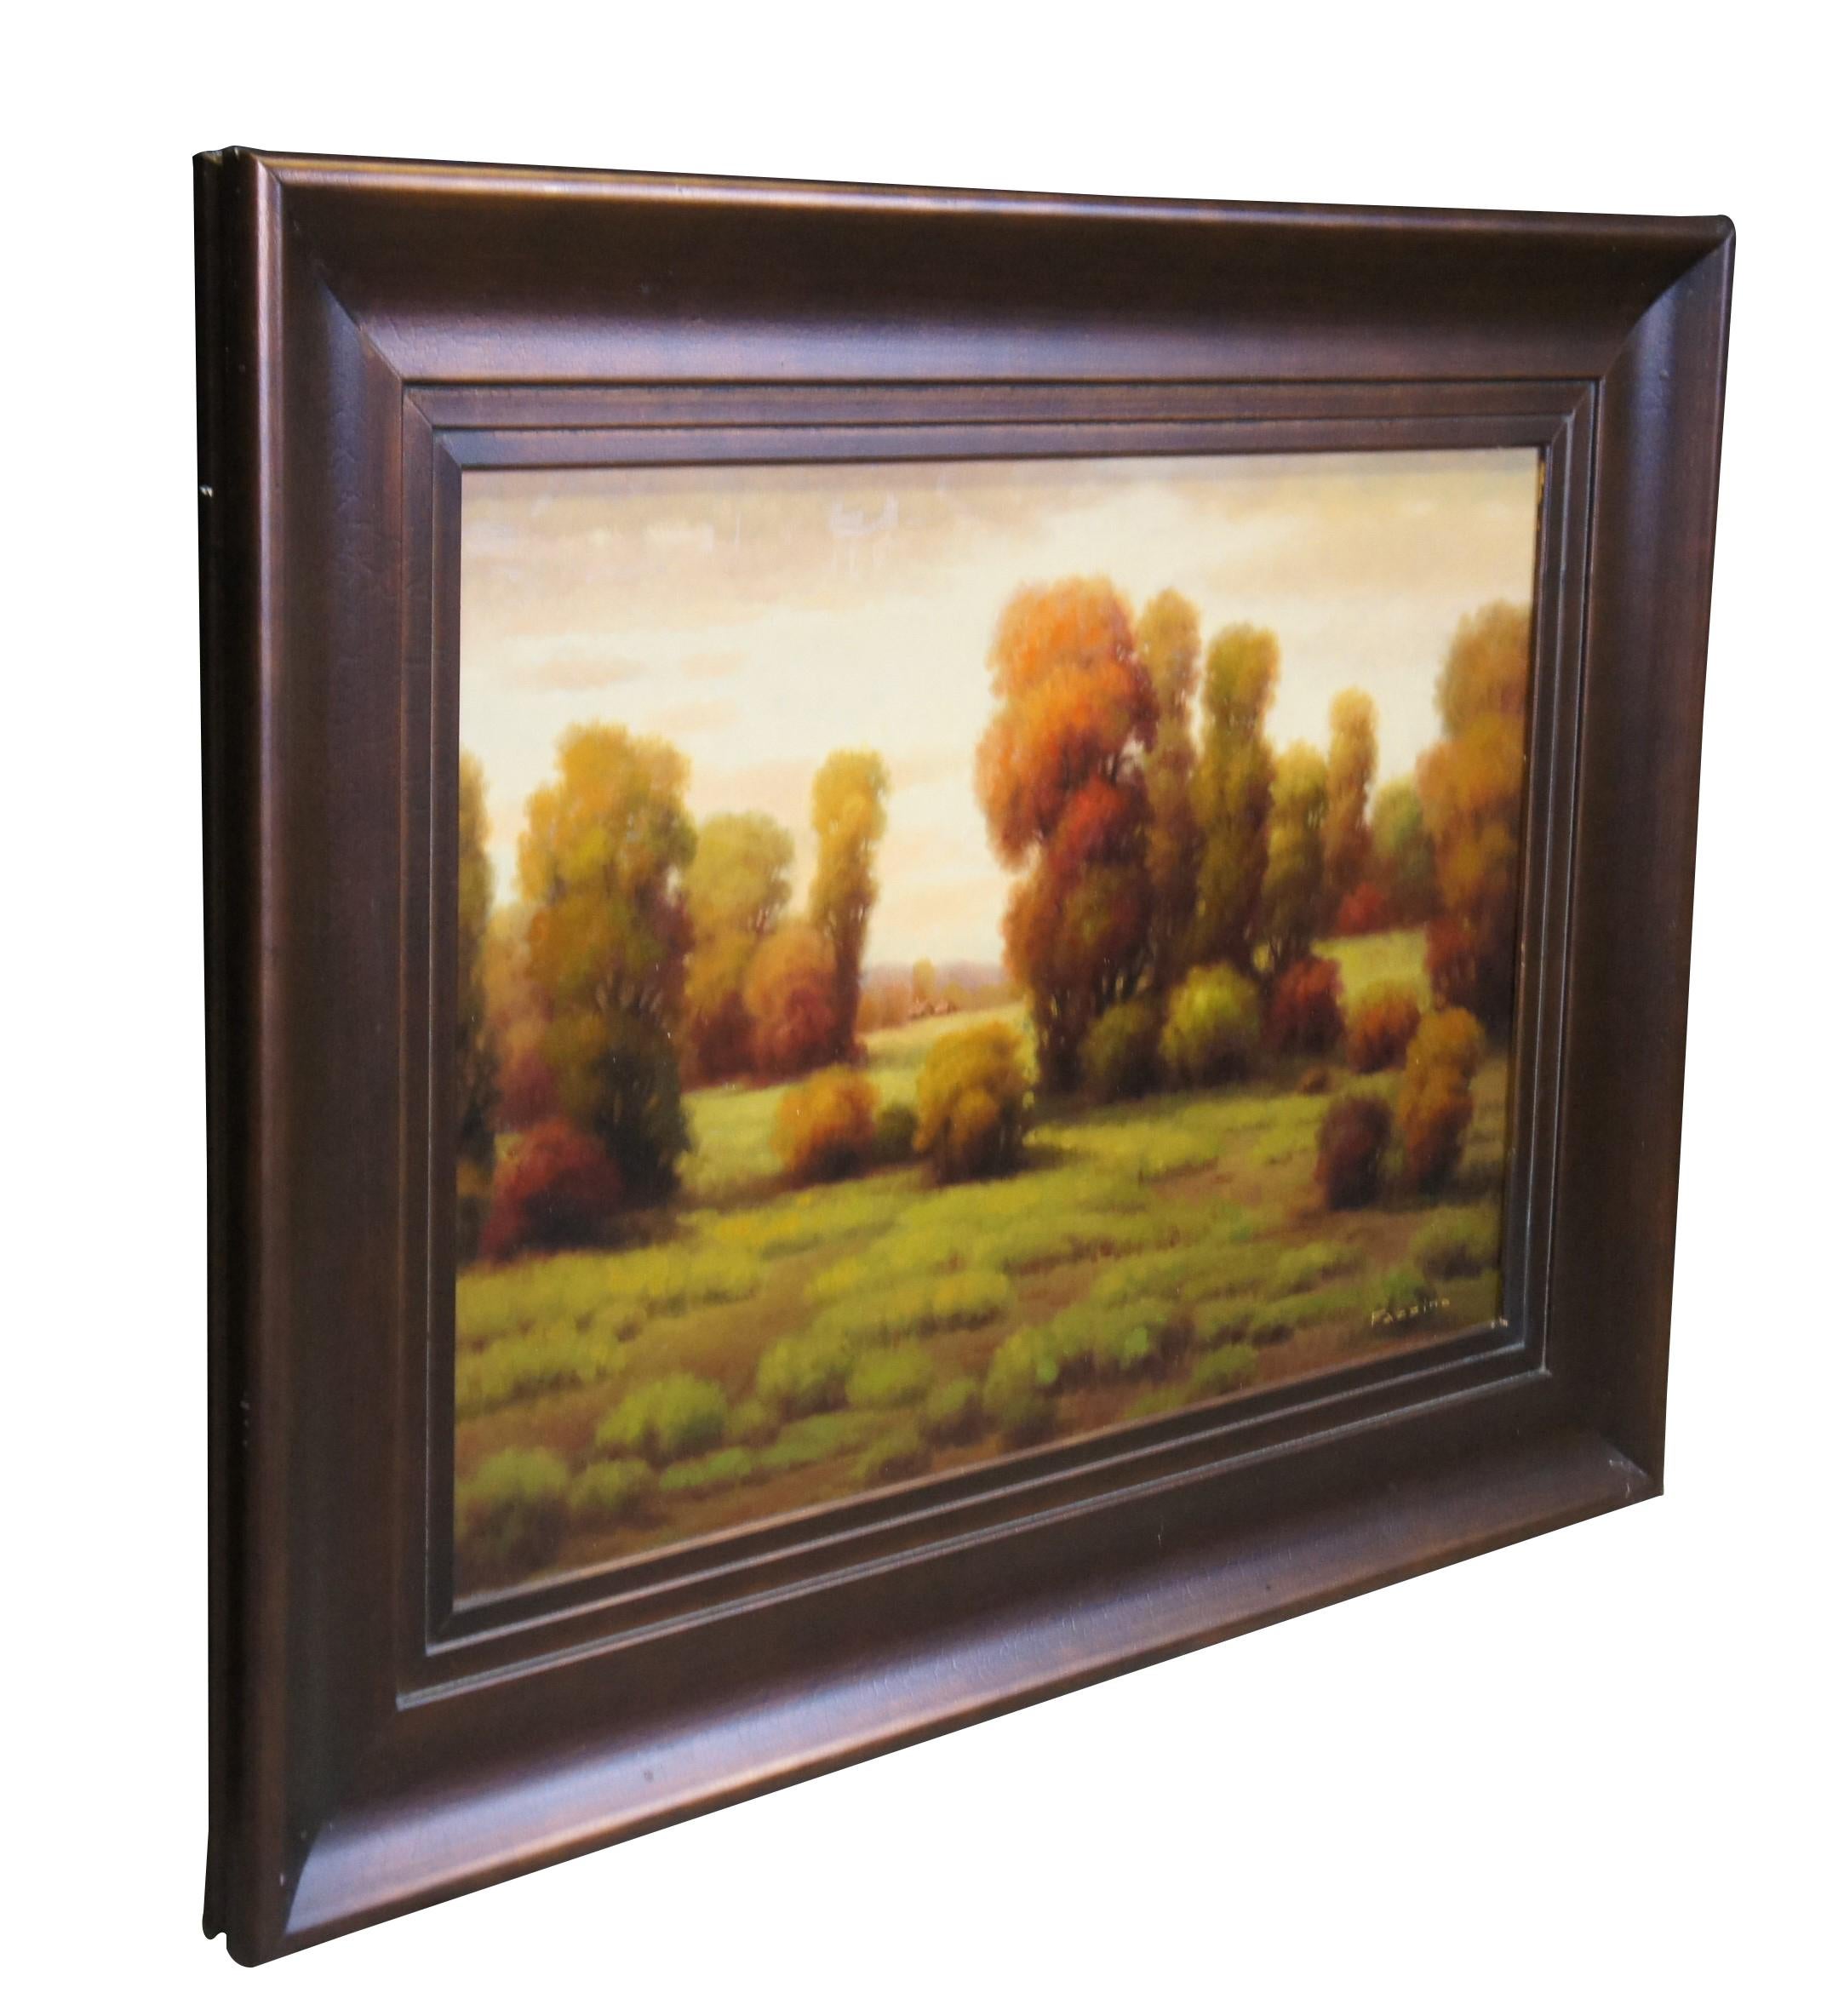 Large vintage oil painting on canvas featuring an impressionist countryside Autumn pastoral landscape.  Framed in gold.

Dimensions:
35.5